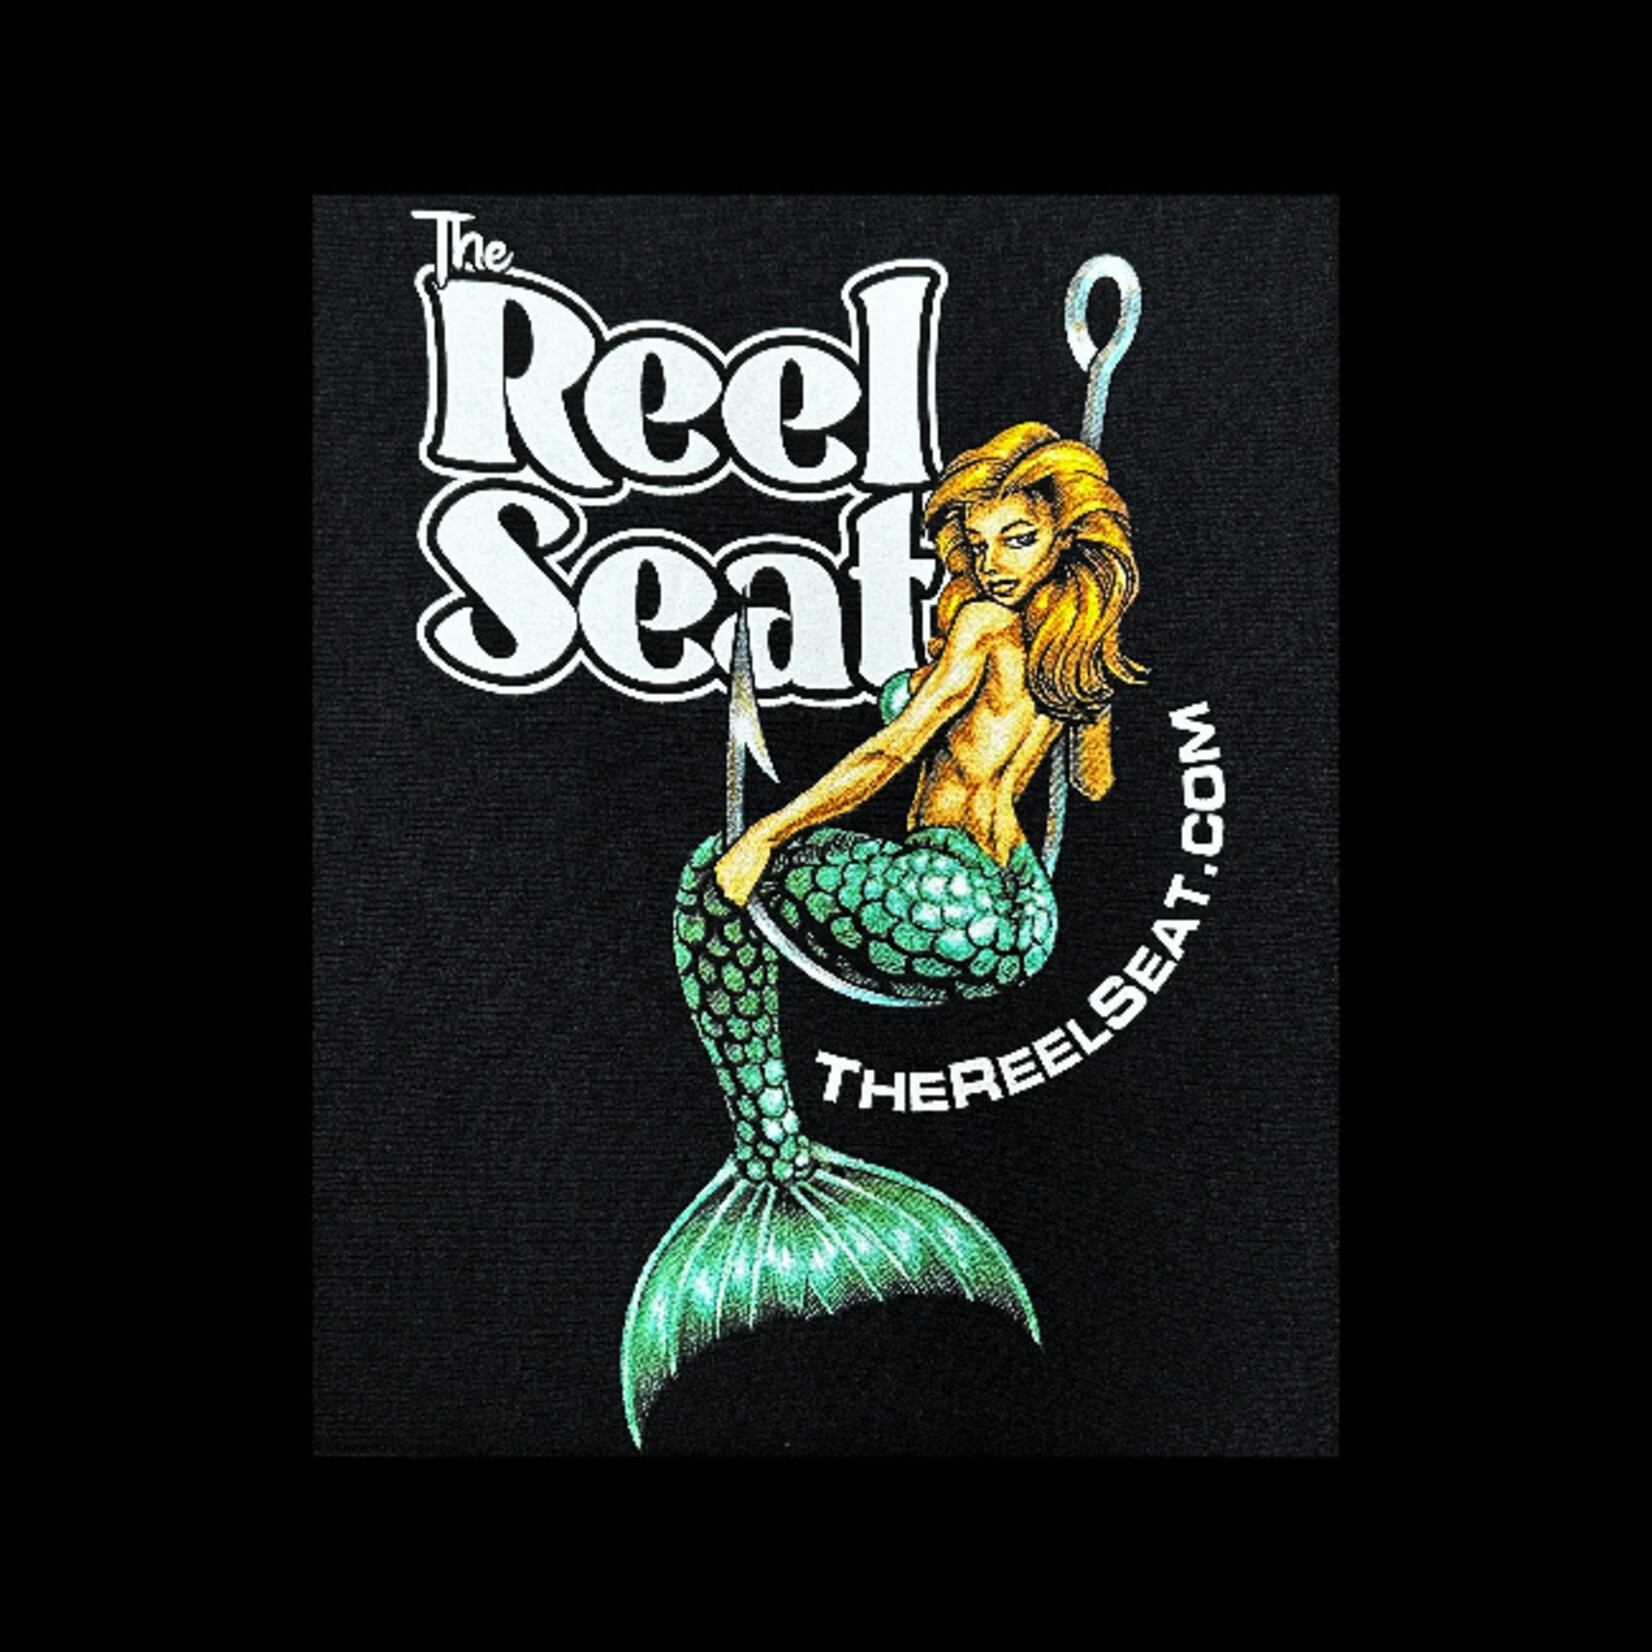 The Reel Seat RS Heavy Weight Hoodie